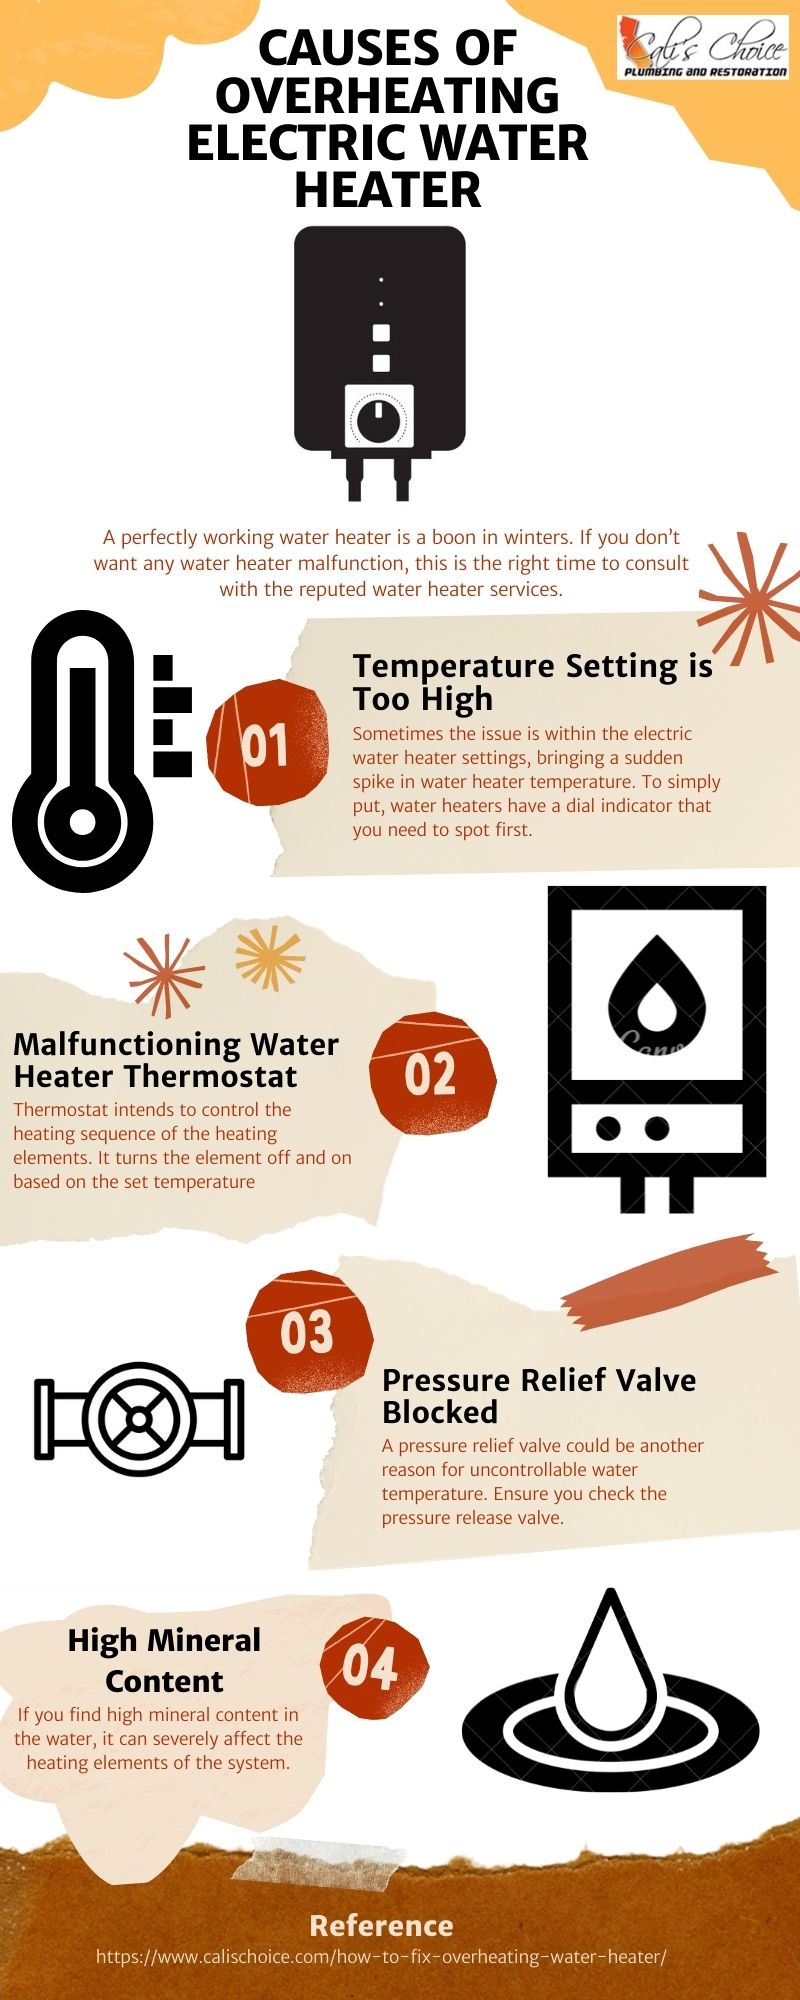 Causes Of Overheating Electric Water Heater